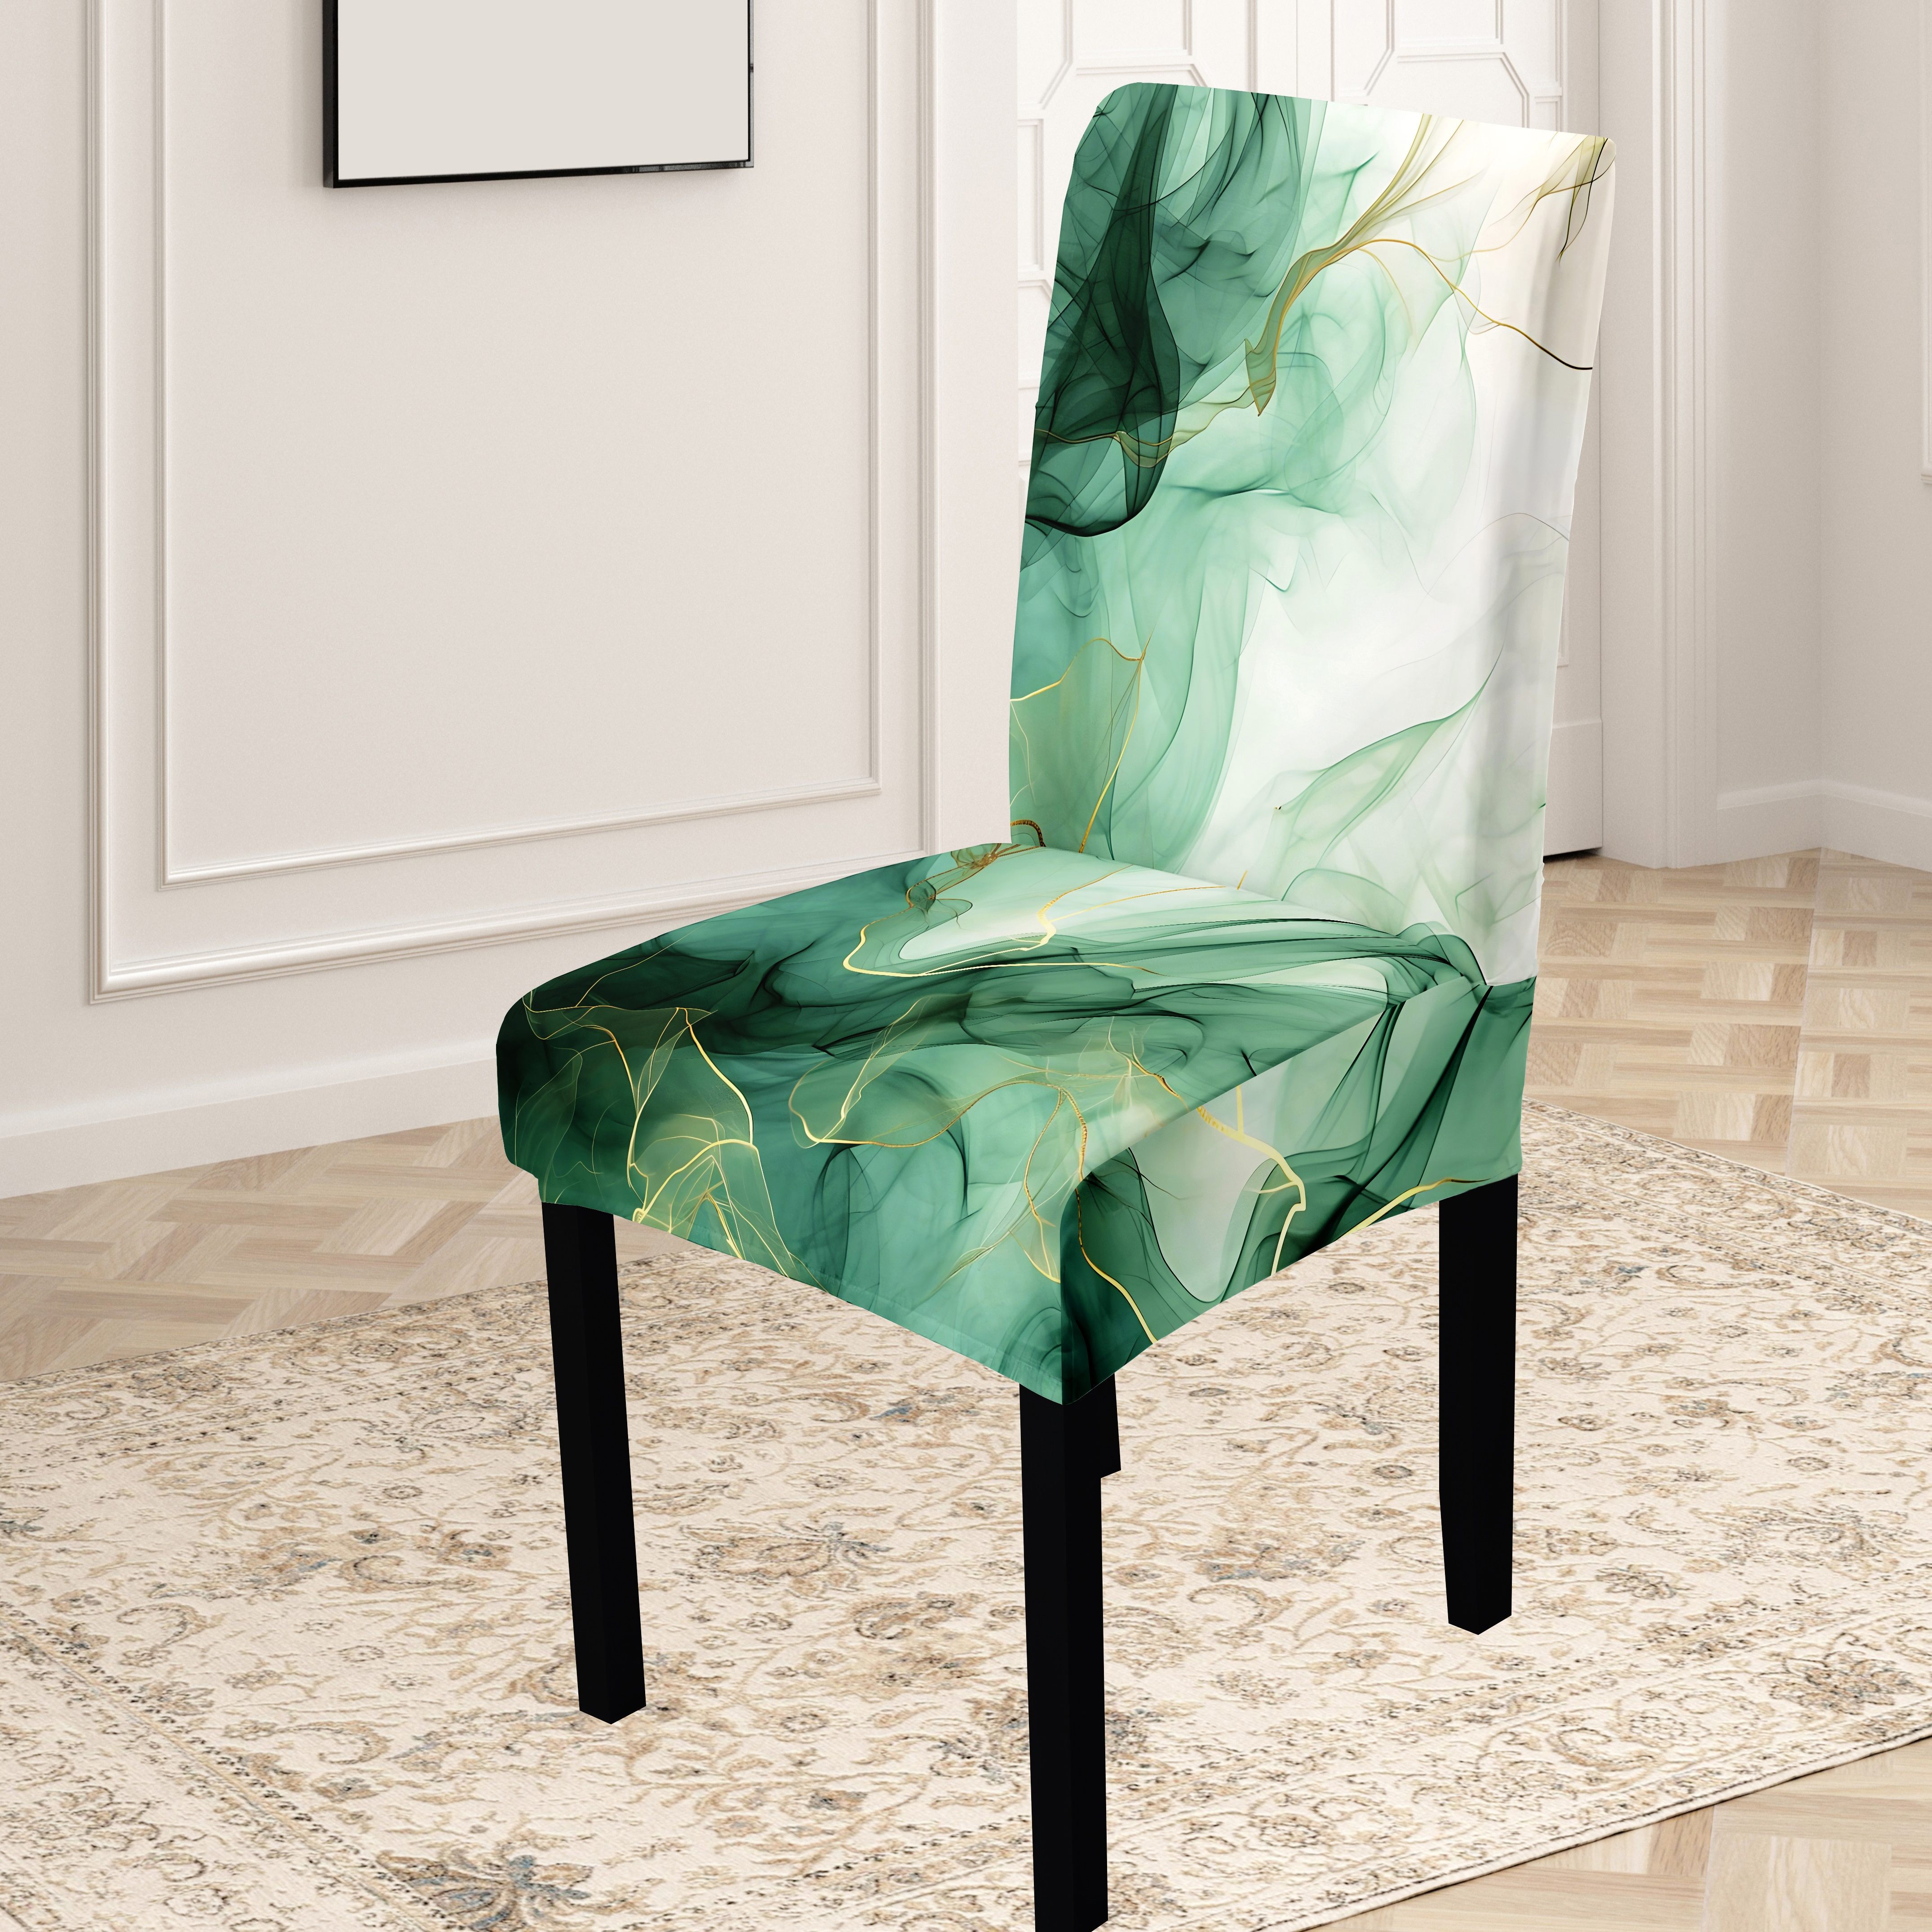 

Glam Style Green Marble Print Chair Slipcovers 4pcs/6pcs - Polyester & Spandex Stretch Chair Covers For Dining Room, Elastic-band Milk Silk Slipcover-grip, Machine Washable, Universal Fit